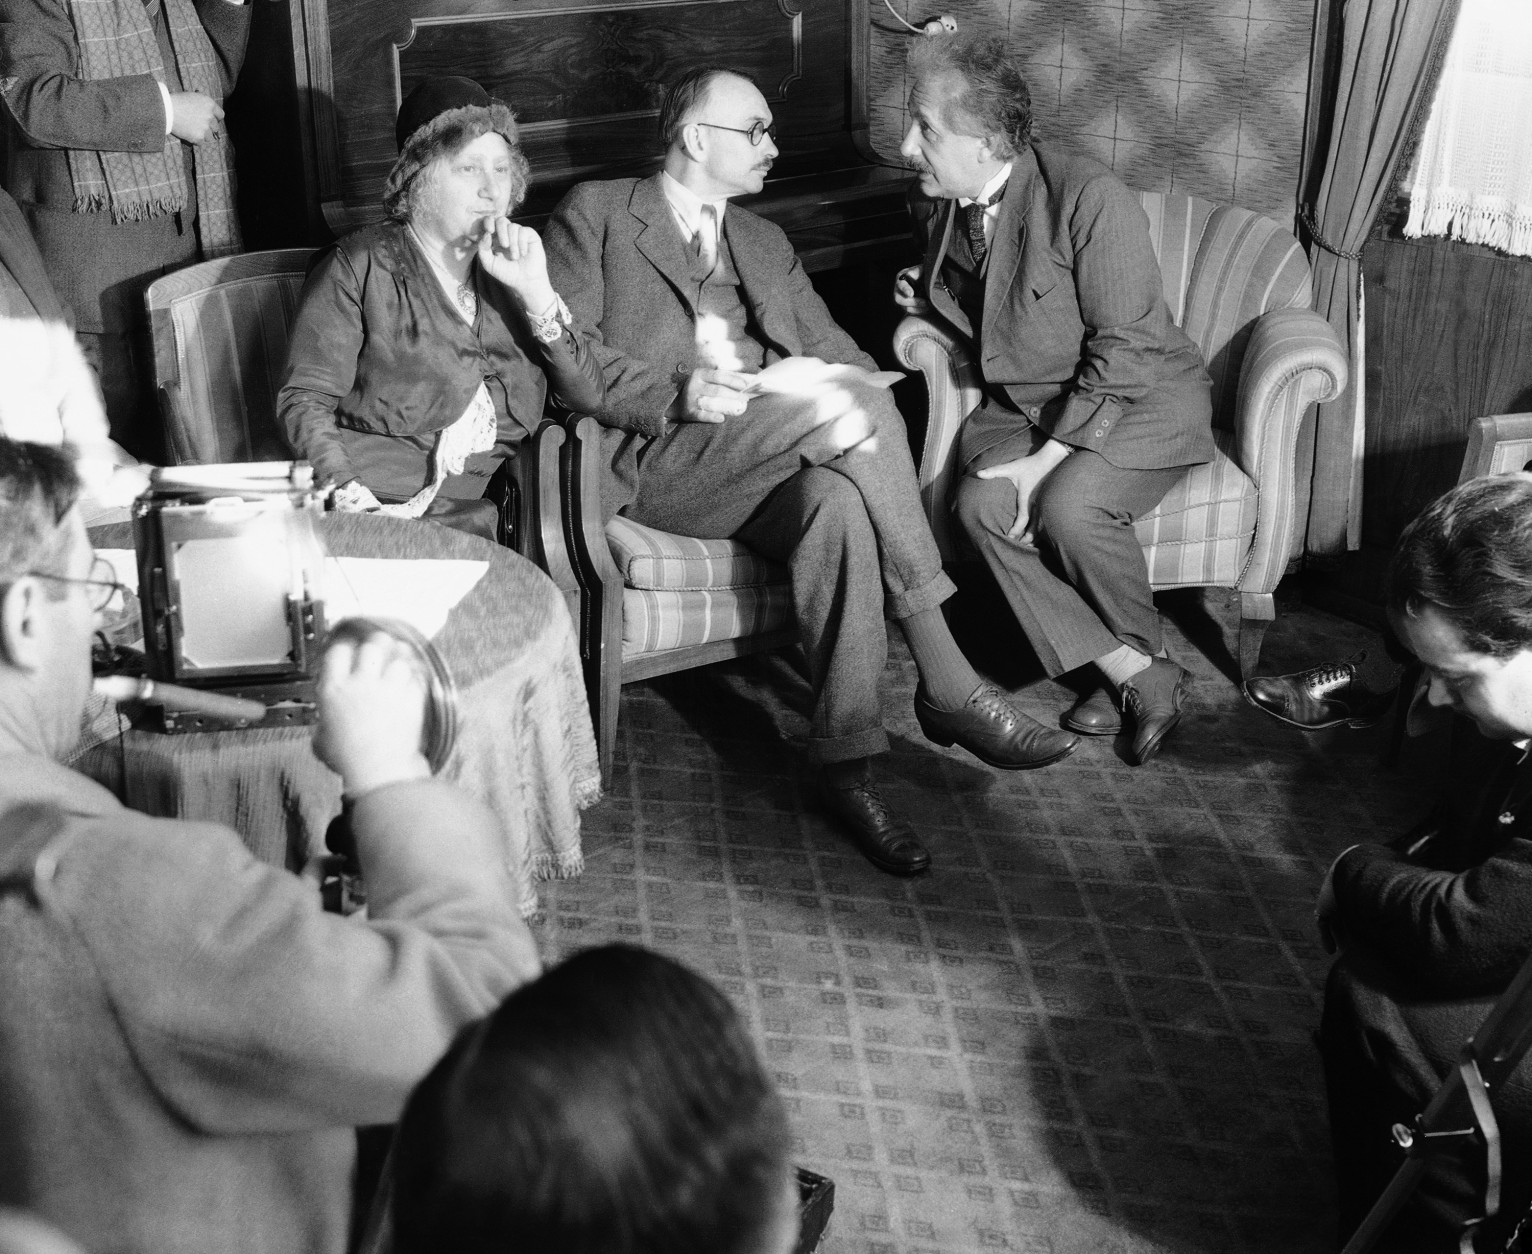 Some of the questions were pretty hard to answer and others were amusing, but Dr. Albert Einstein, noted physicist, right, did his best to enlighten newspaper reporters who met him on his arrival aboard the motor ship Portland in Los Angeles, Calif., Dec. 30, 1932.  Dr. R.C. Tolman, of the California Institute of Technology, center, is who put the newsmen's questions to Dr. Einstein. Einstein's wife Elsa is at the left. (AP Photo)